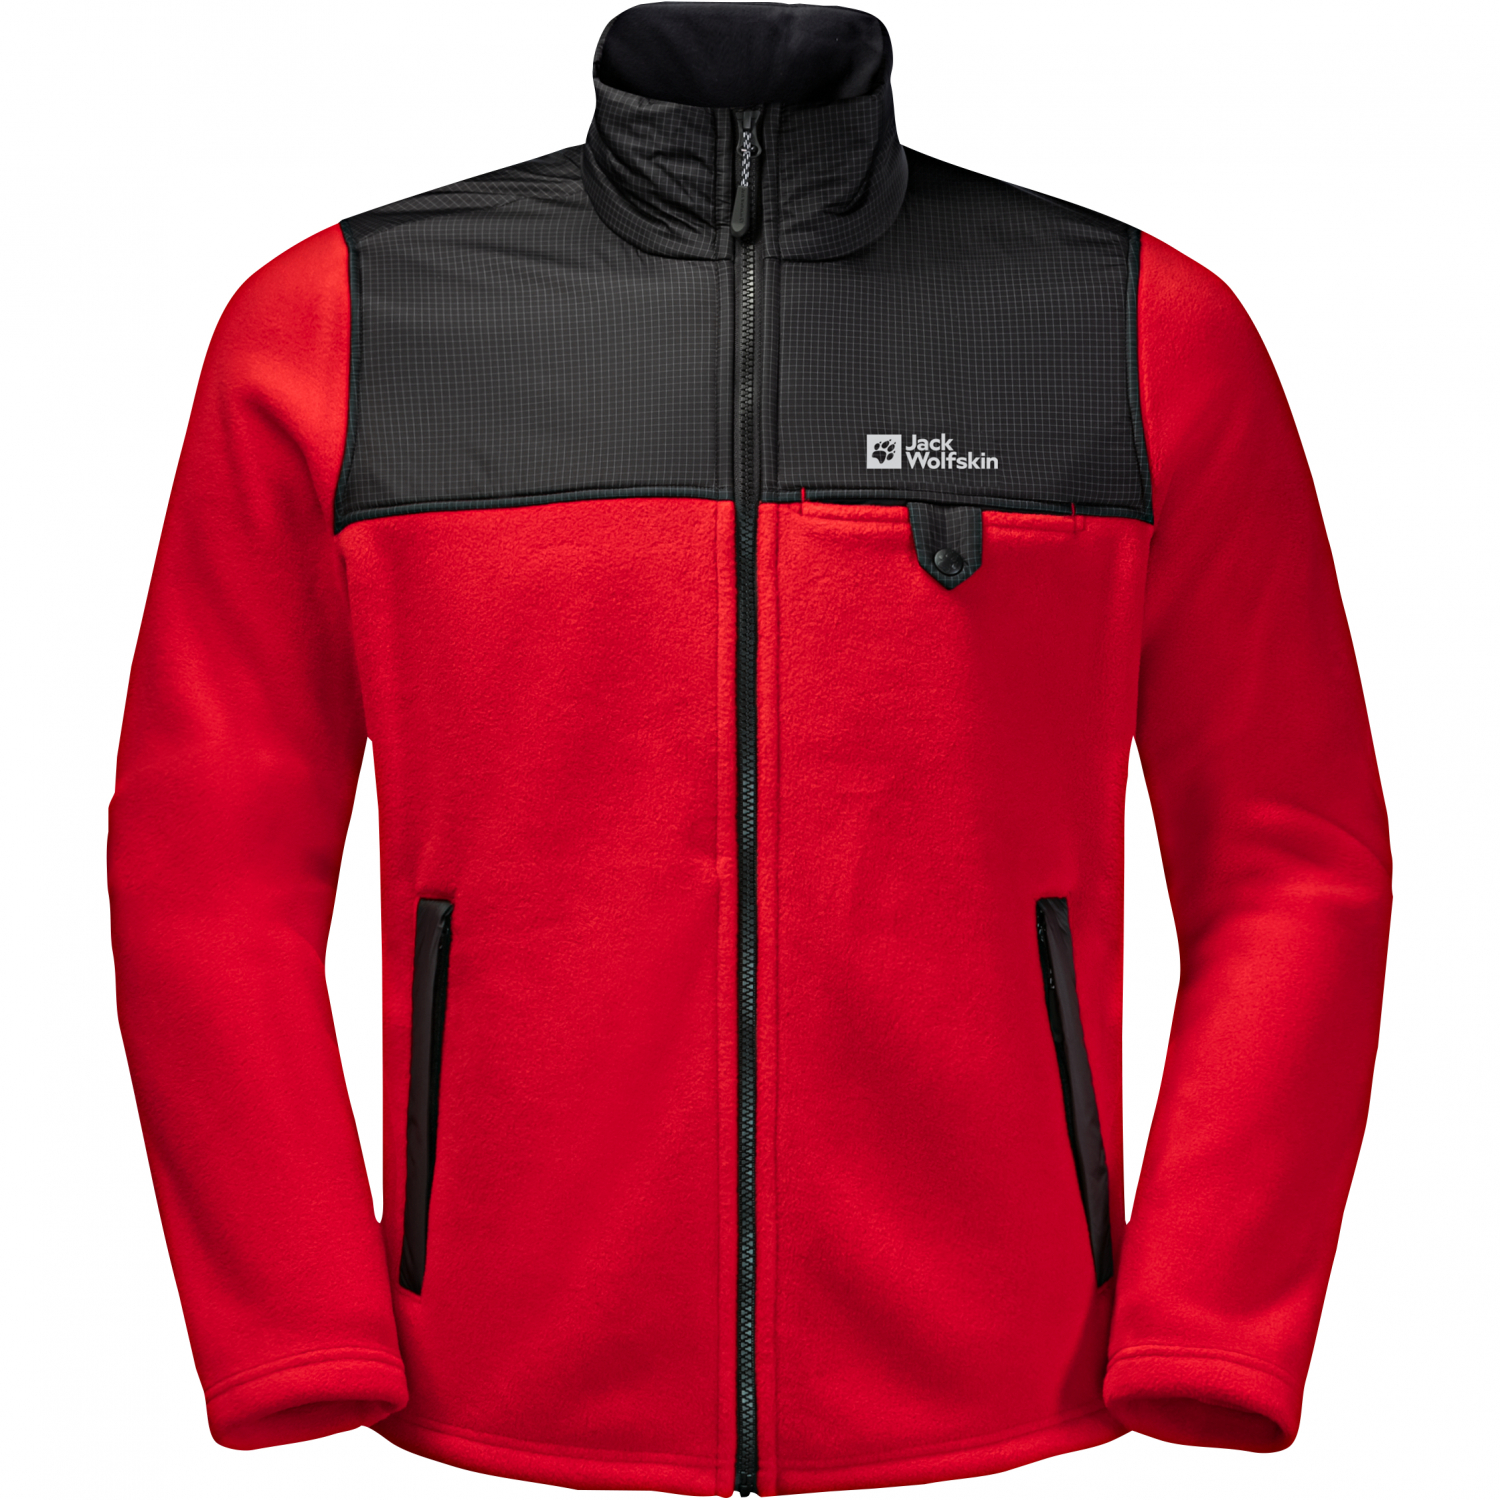 Jack Wolfskin DNA Grizzly fleece low jacket Shop (red/black) Askari prices | at Fishing